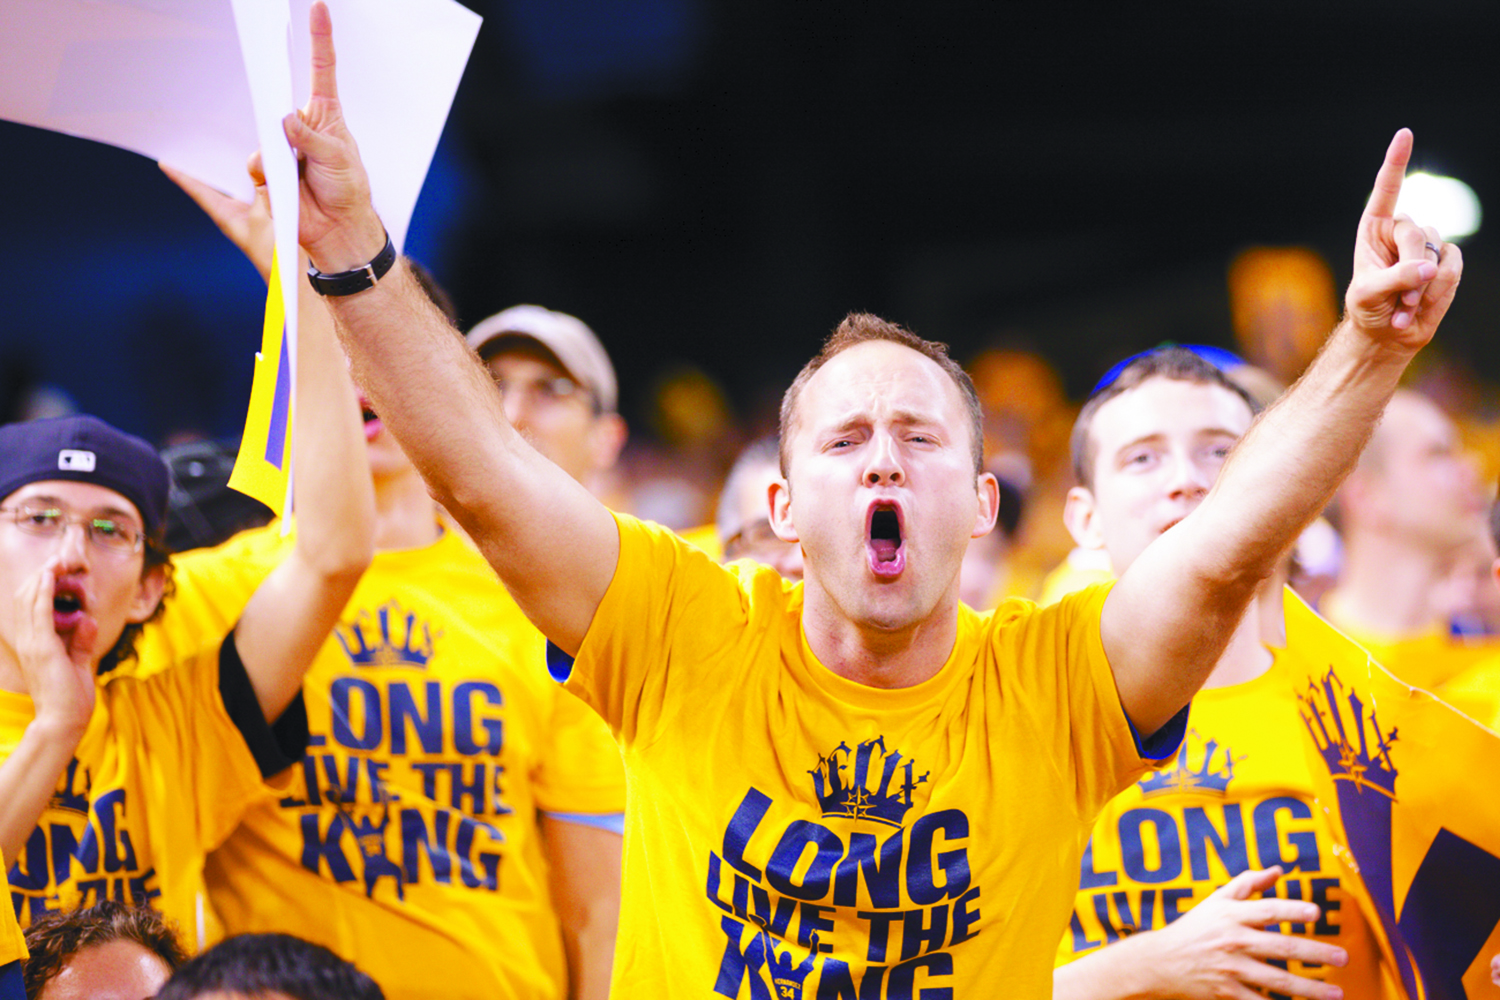 But that didn't mean they still weren't supportive - like this fan from the King's Court section on Friday night.